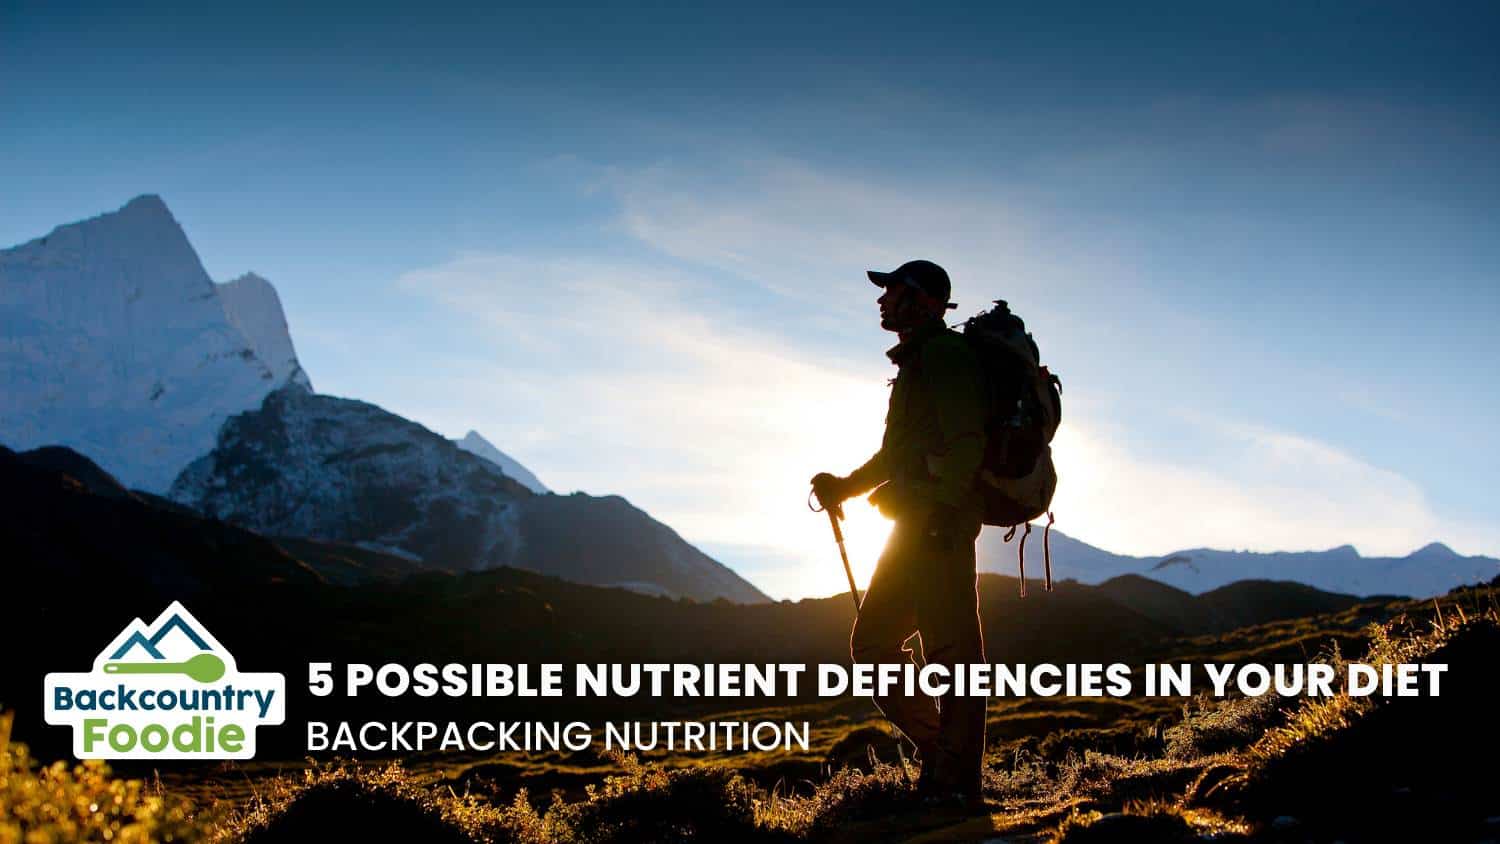 Backcountry Foodie Blog 5 Possible Nutrient Deficiencies in Your Diet Backpacking Nutrition blog thumbnail image